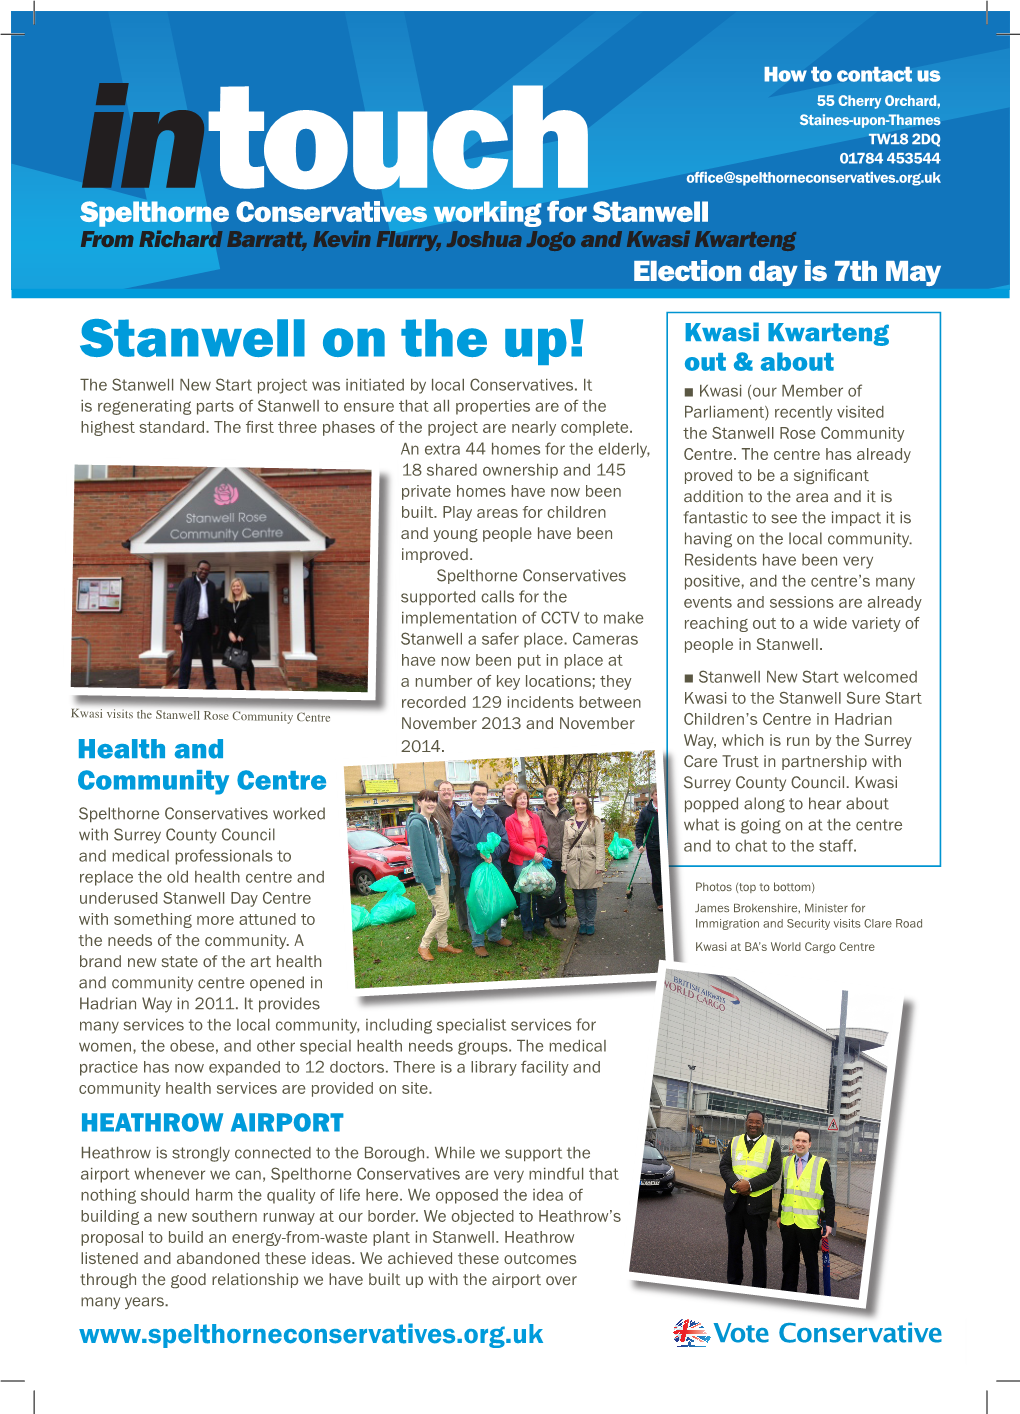 Stanwell on the Up! out & About the Stanwell New Start Project Was Initiated by Local Conservatives